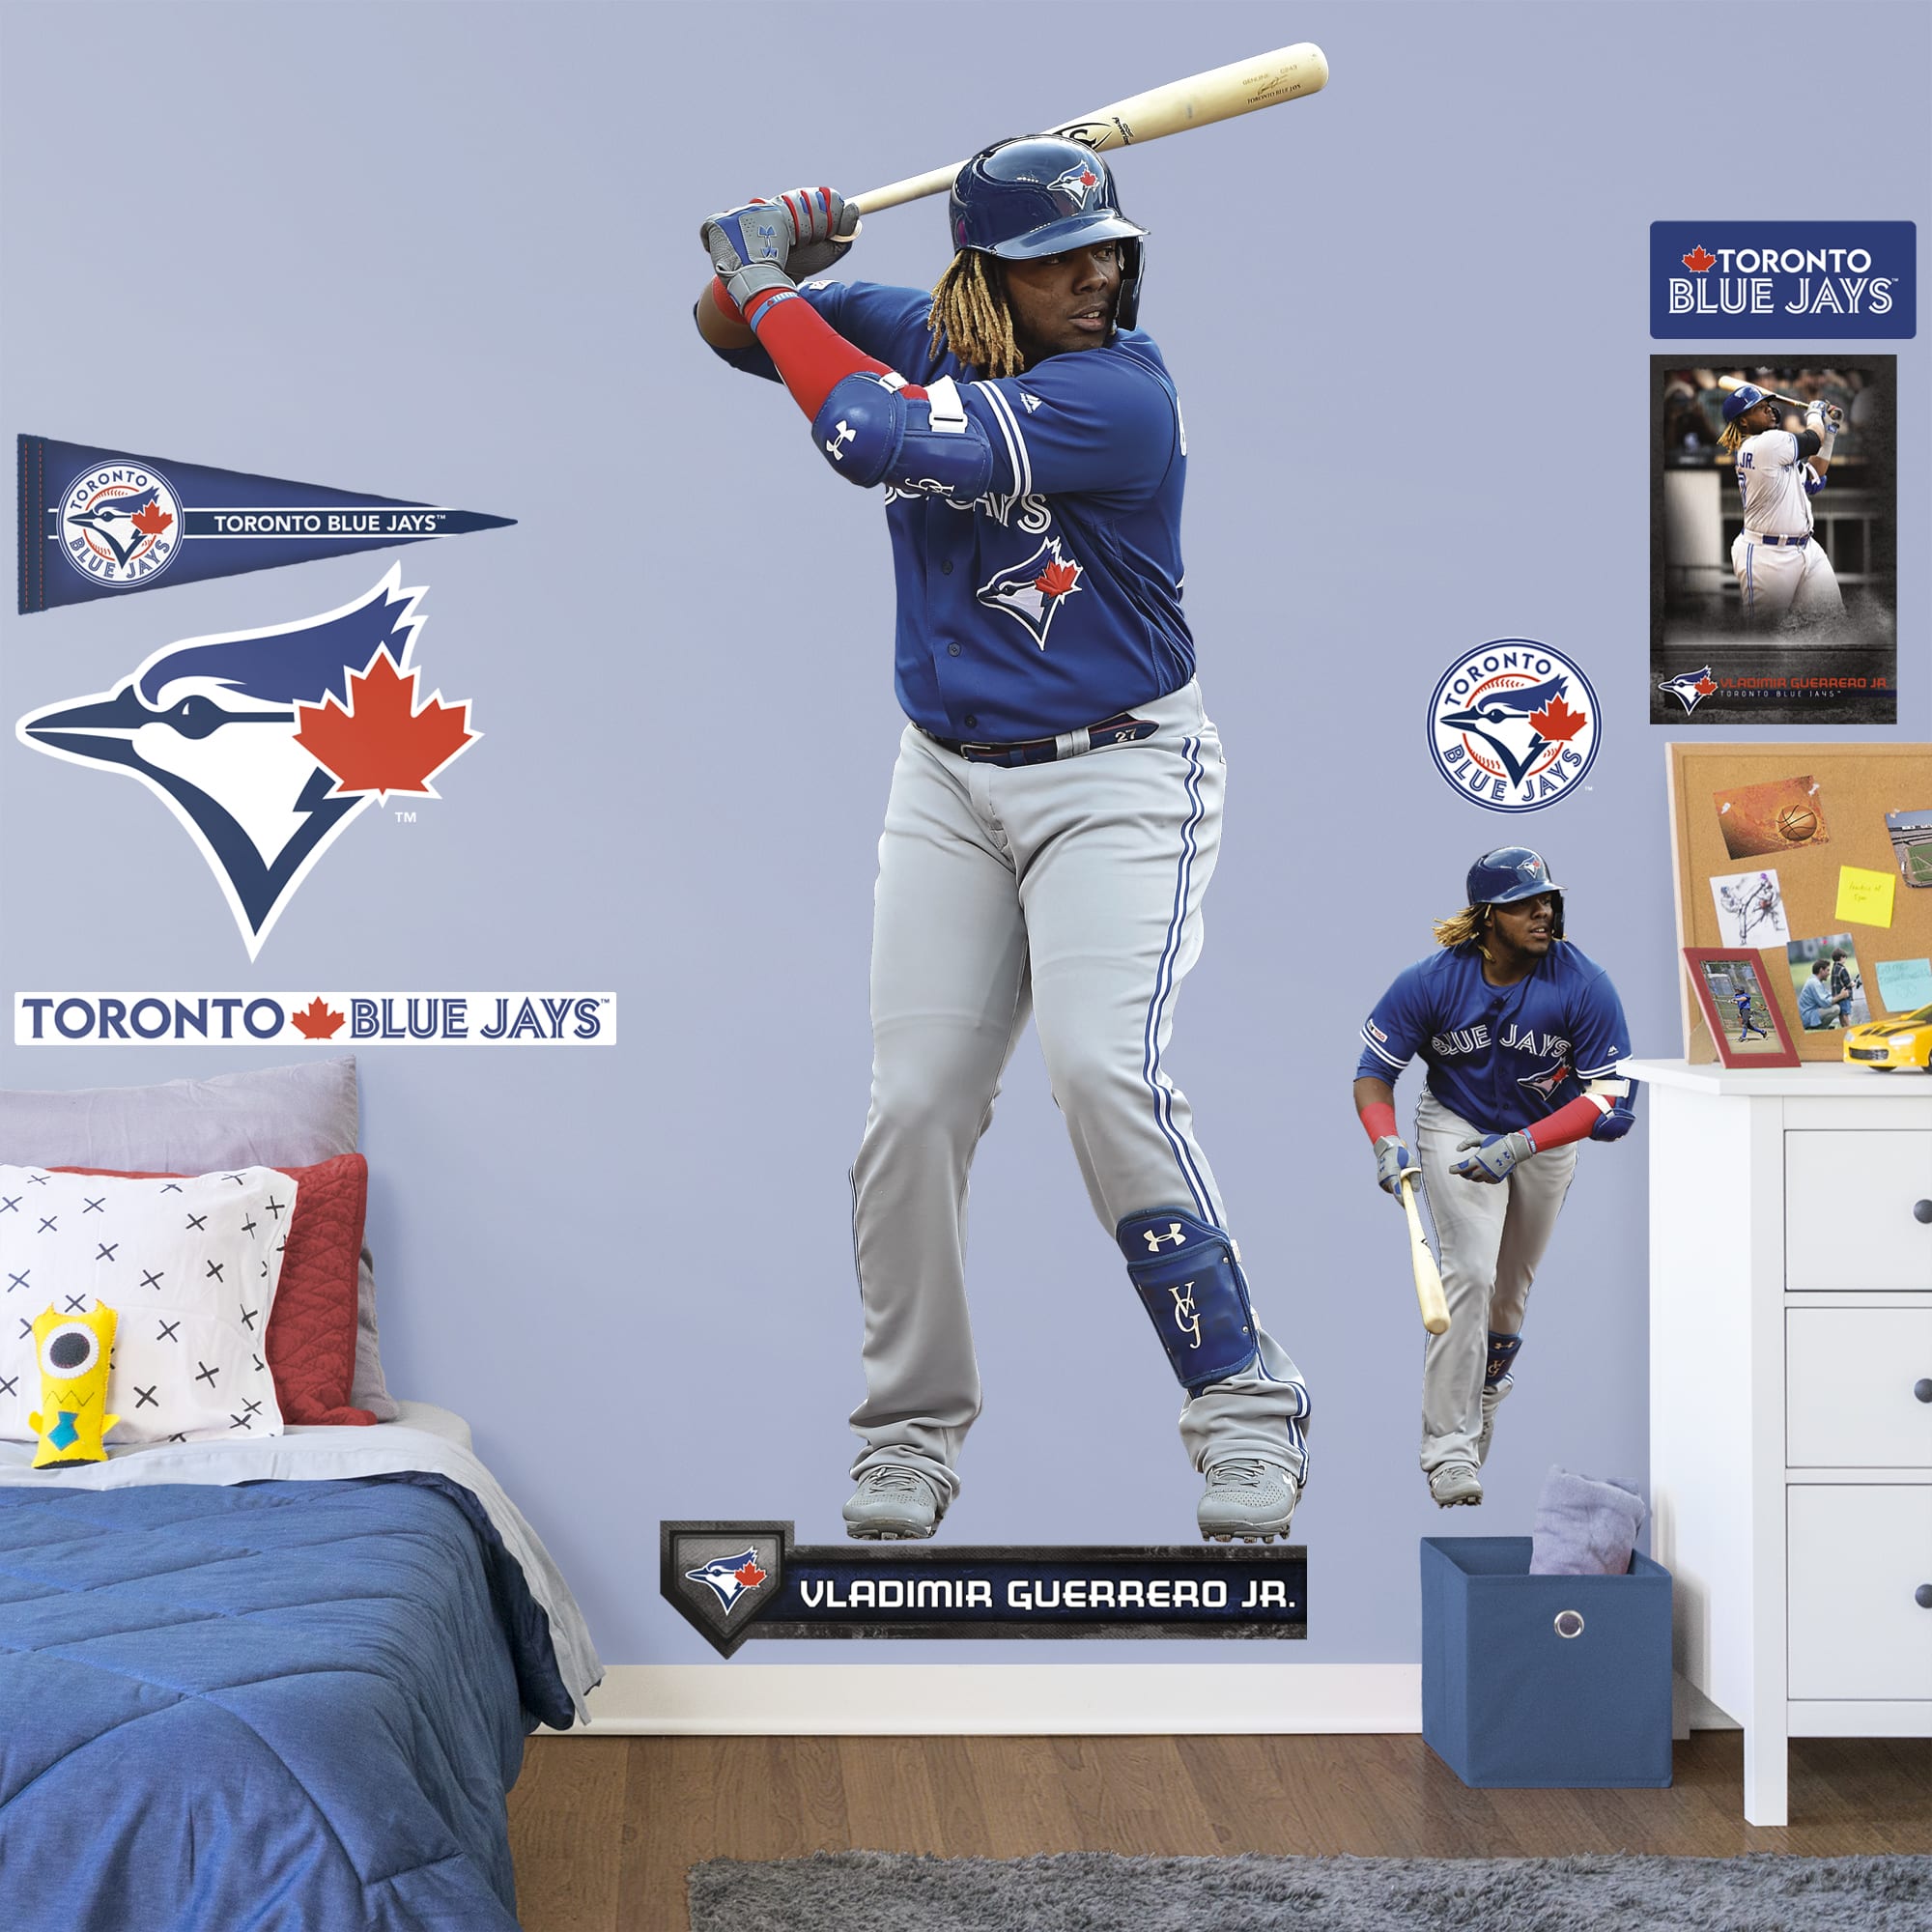 Vladimir Guerrero Jr. for Toronto Blue Jays - Officially Licensed MLB Removable Wall Decal Life-Size Athlete + 8 Decals (35"W x